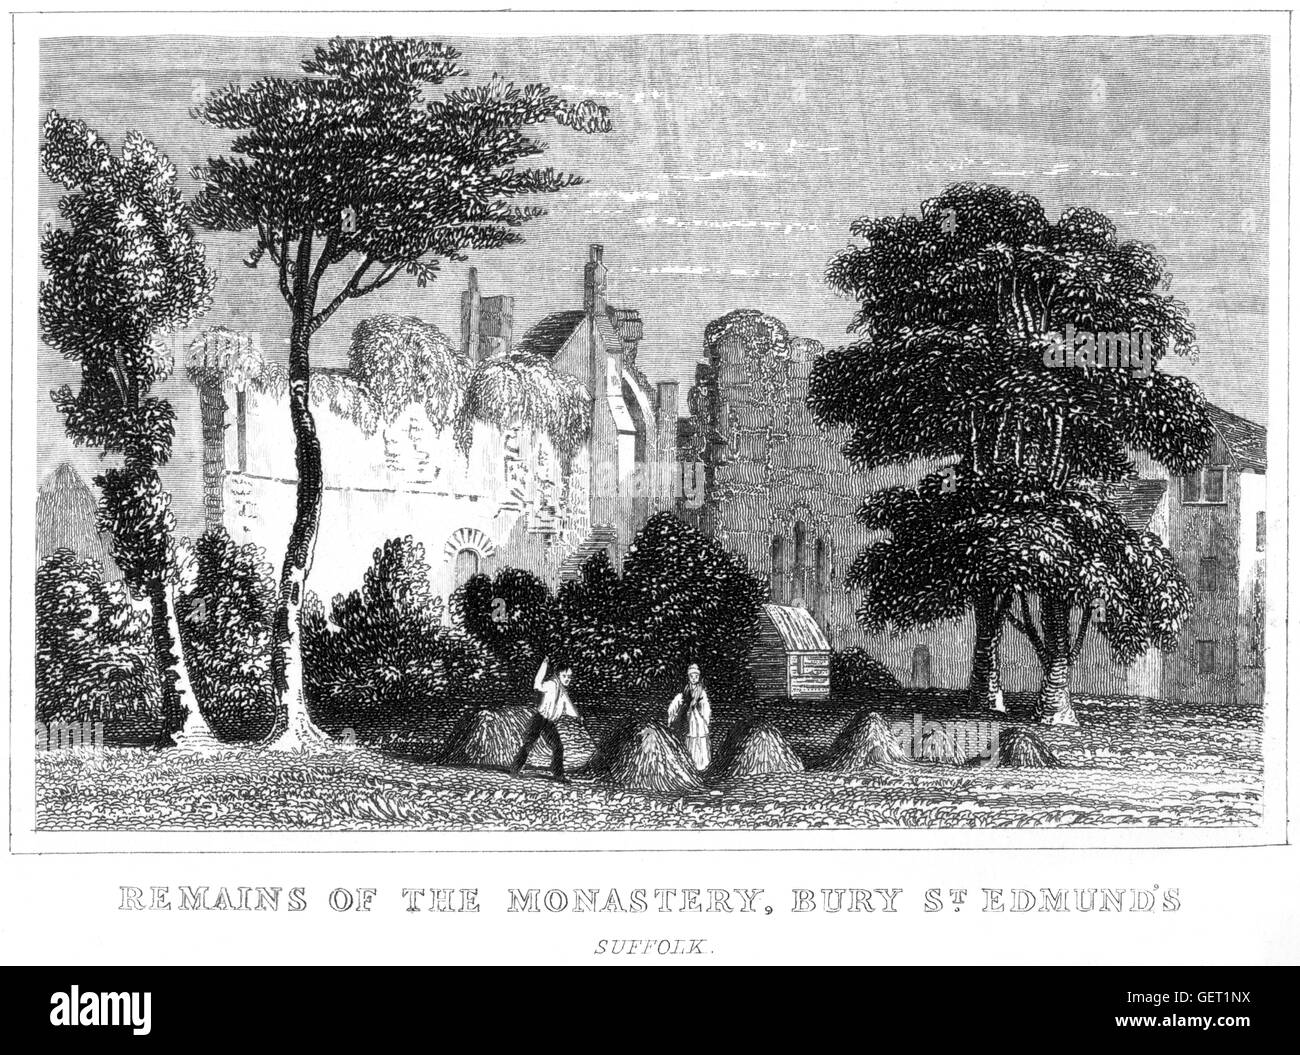 Engraving of the Remains of the Monastery, Bury St. Edmunds, Suffolk scanned at high resolution from a book printed in 1846. Believed copyright free. Stock Photo